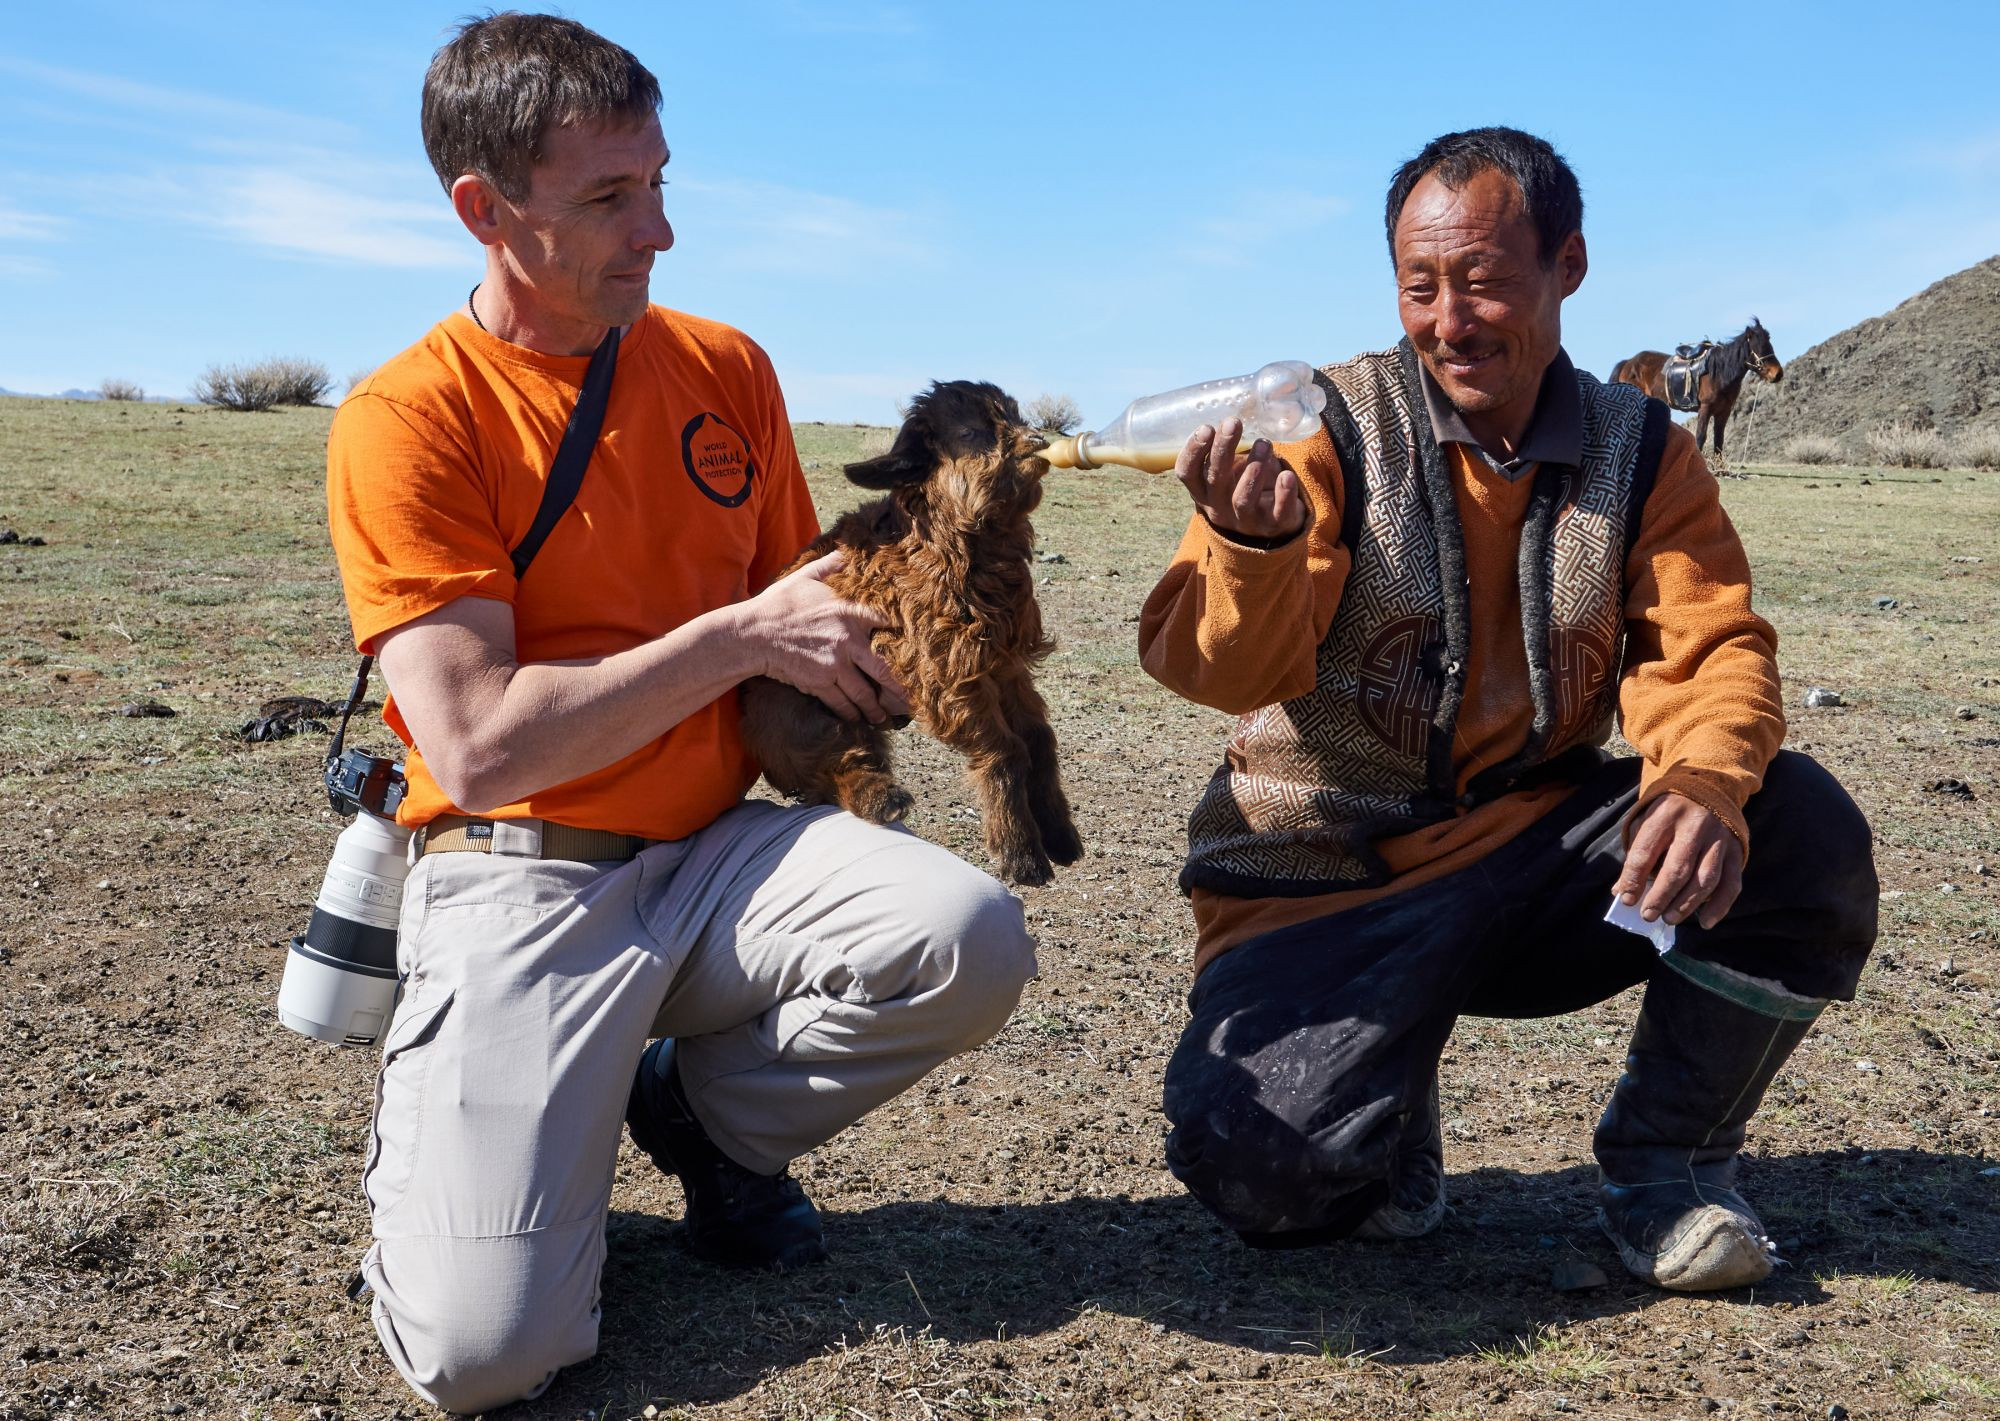 Steven Clegg from our disaster team feeding a baby goat in Mongolia.